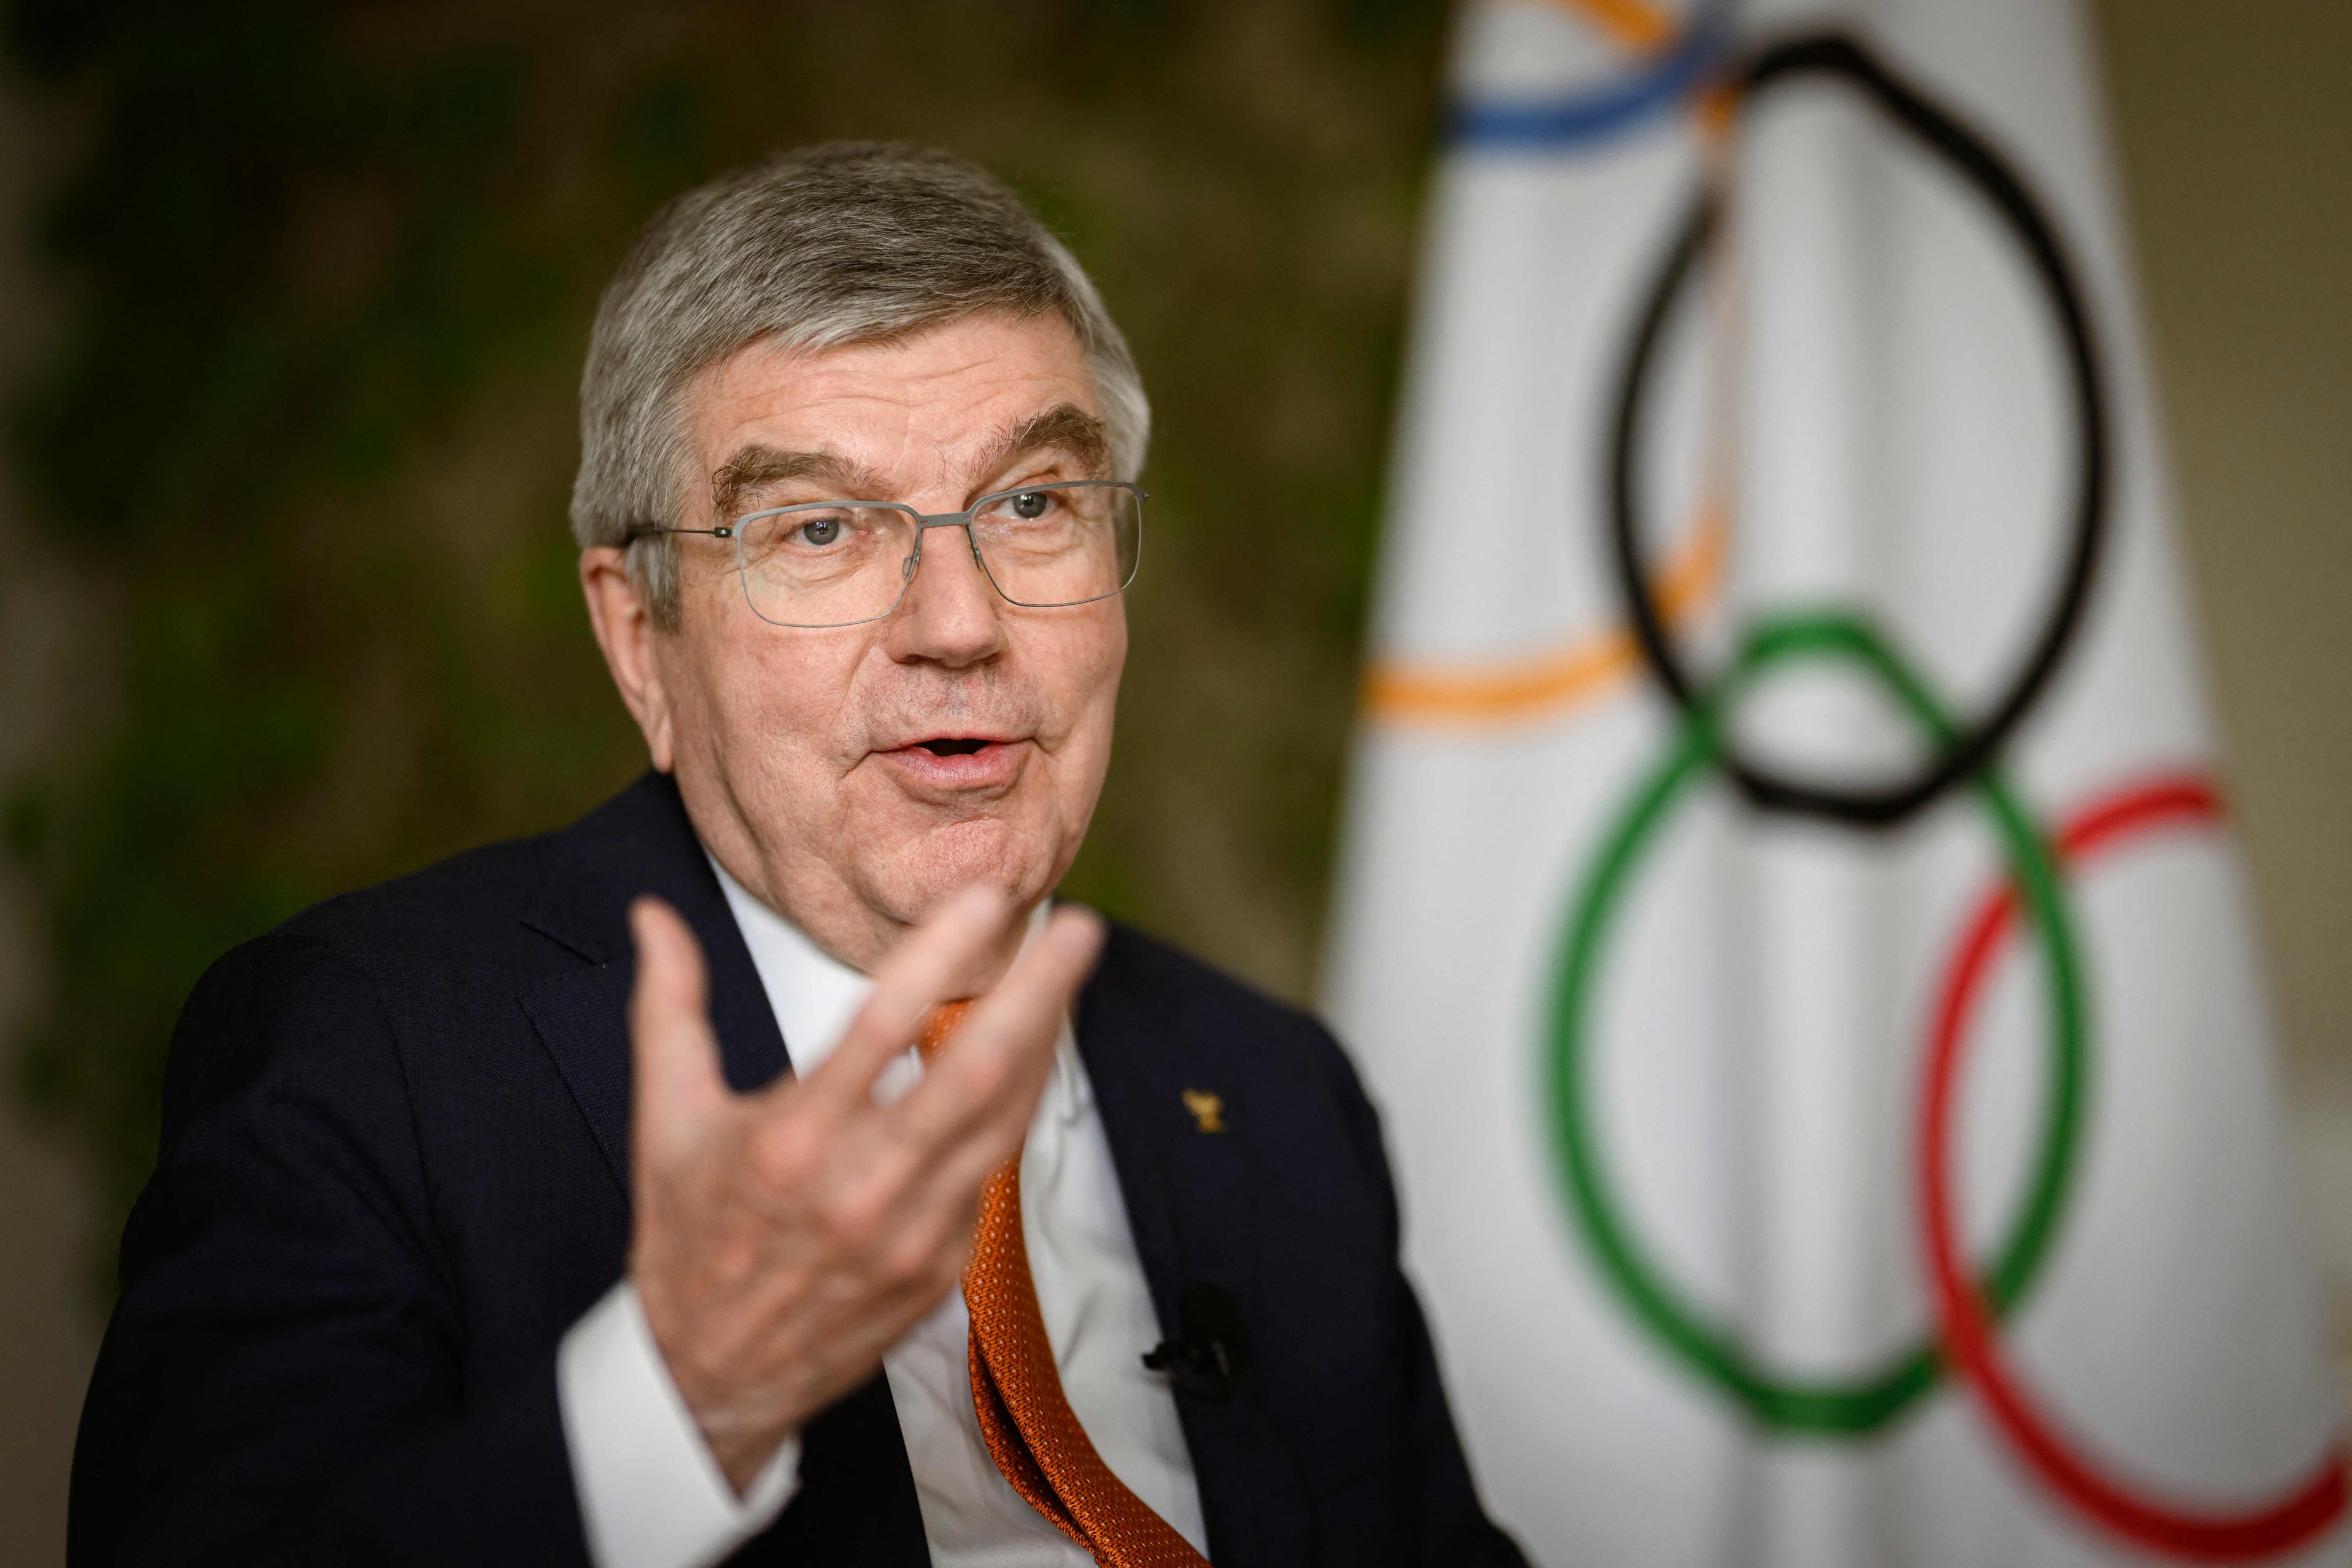 Thomas Bach, 70, has run the Switzerland-based guardian of the Olympic Games since 2013, when interest in hosting the event was near rock-bottom. Photo: AFP